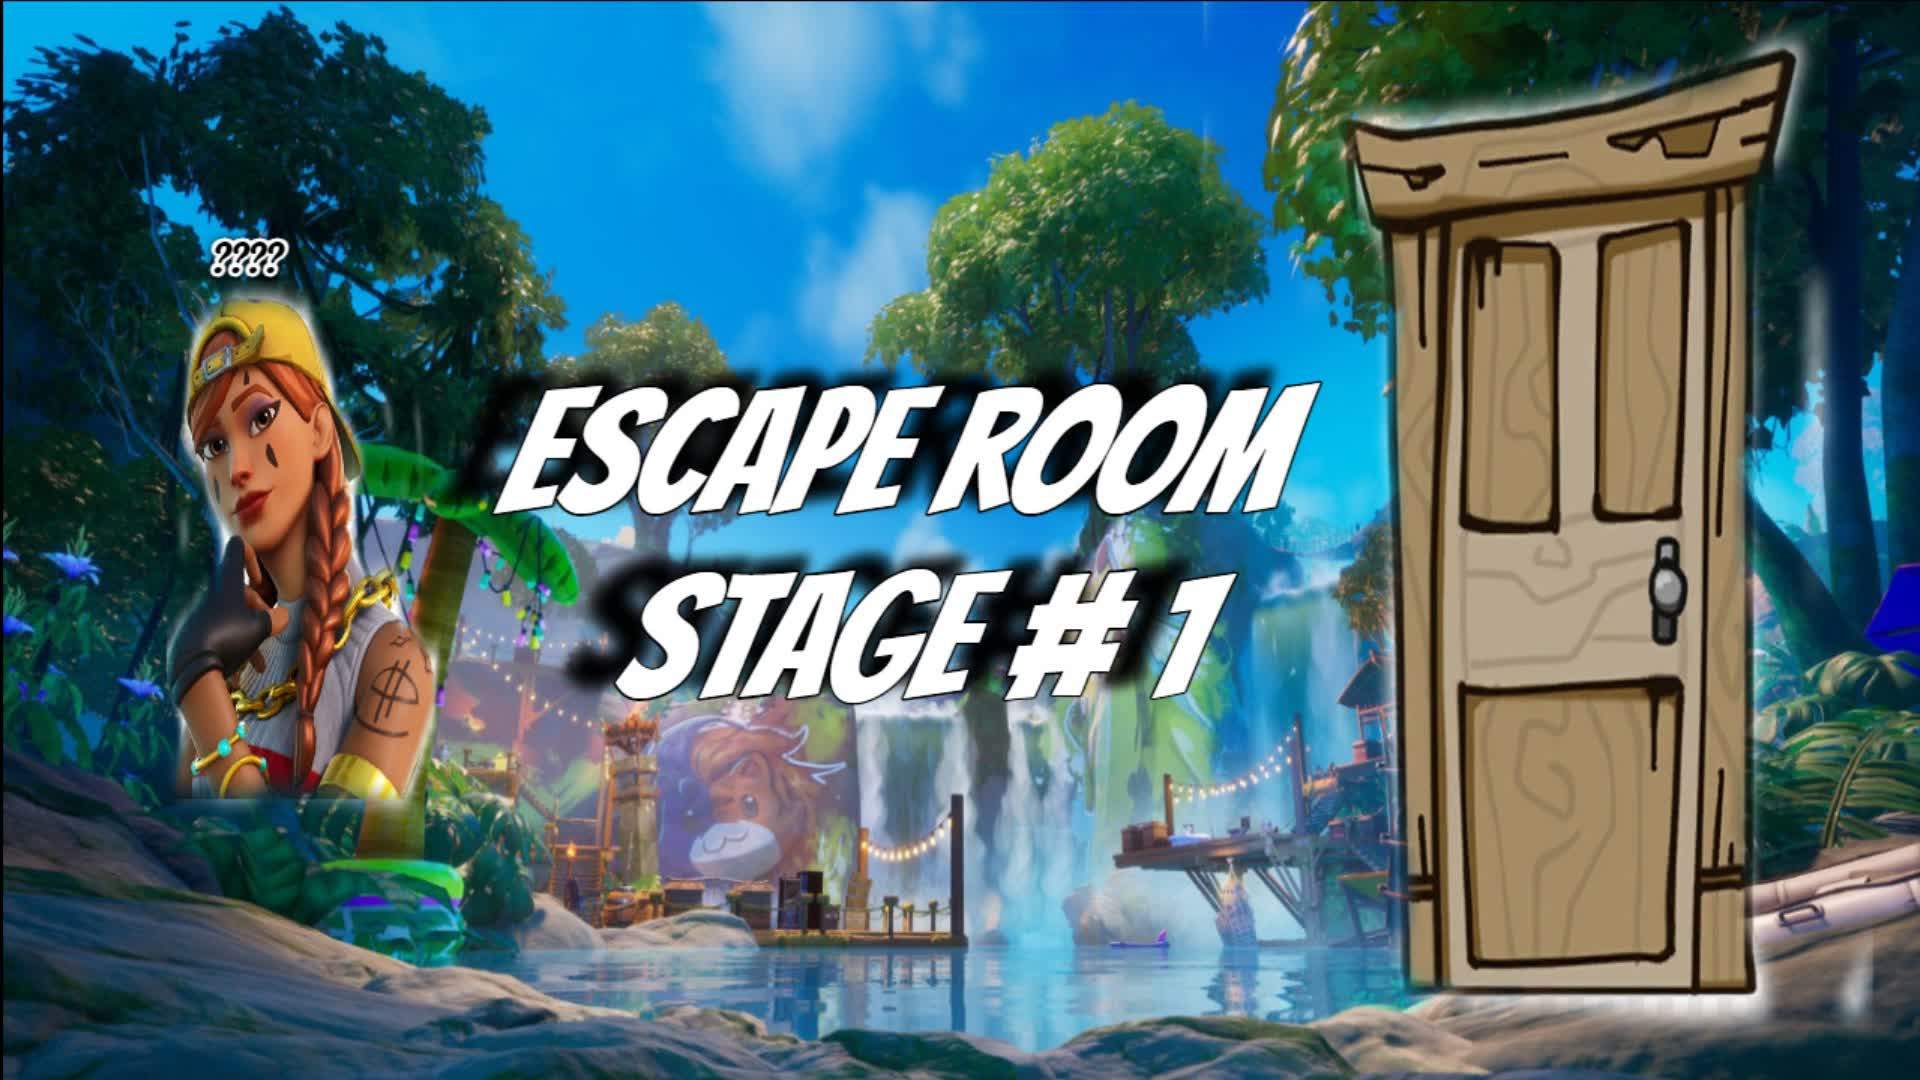 Escape Room Stage #1